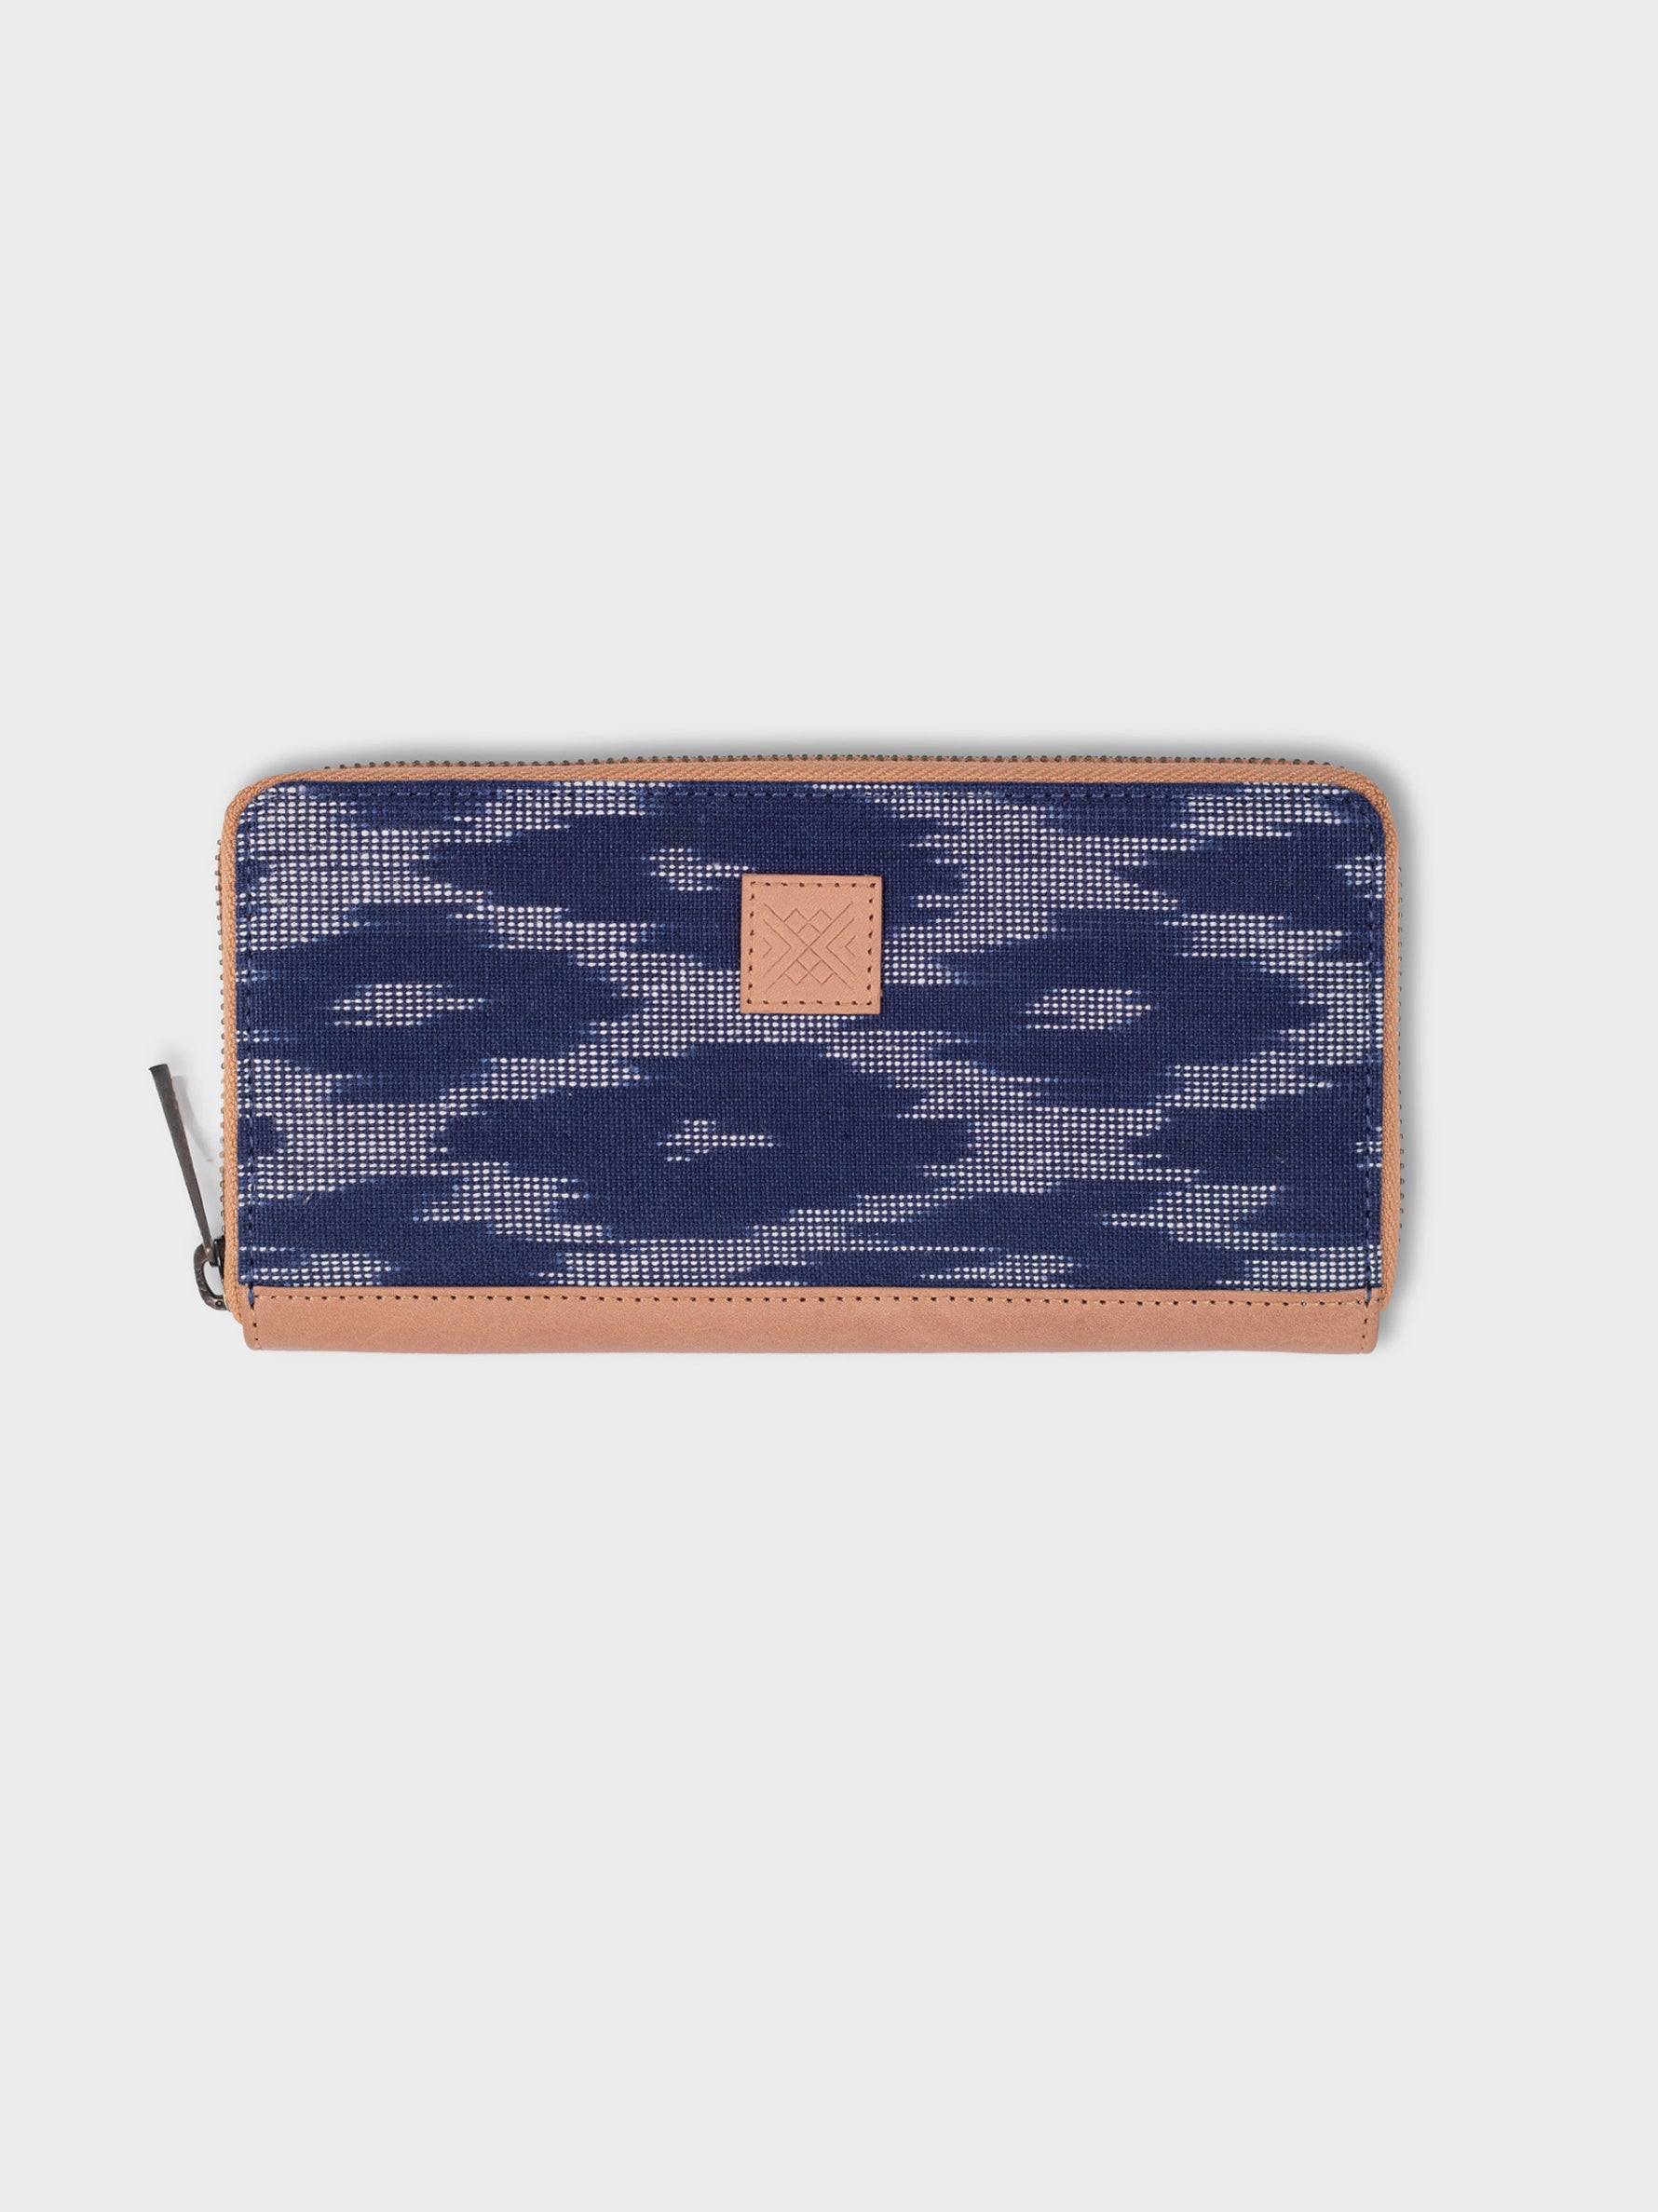 Handcrafted Premium Genuine Vegetable Tanned Leather & Ikat Navy Blue Slim Clutch Wallet  for Women Tan & Loom